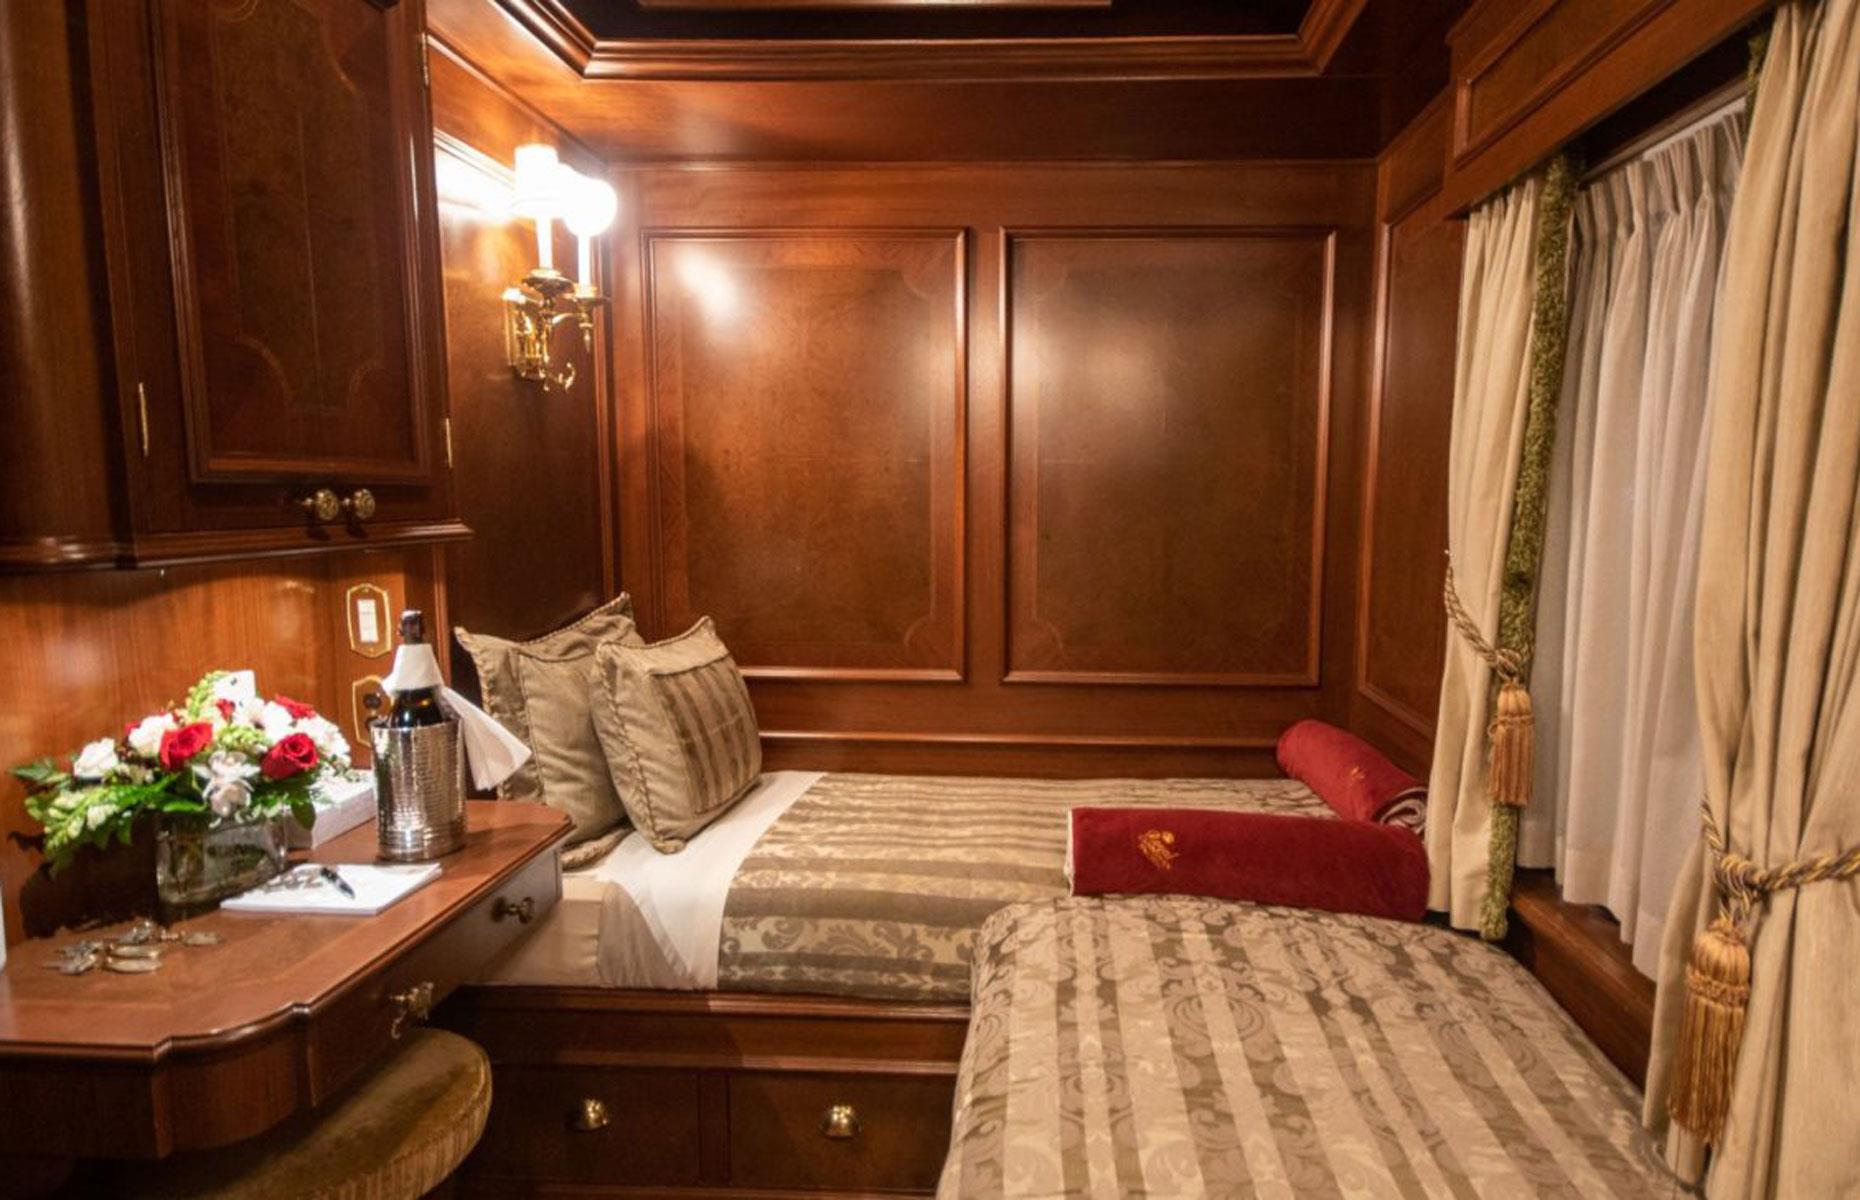 <p>Guests aboard this "five-star hotel on wheels" are treated like royalty and can dine from a locally and ethically sourced menu that boasts specialities such as caviar and Alberta venison, not to mention the most prized Canadian wines.</p>  <p>The staterooms are every bit as luxurious as you'd expect. Each features its own indulgent amenities, including a three-piece ensuite bathroom.</p>